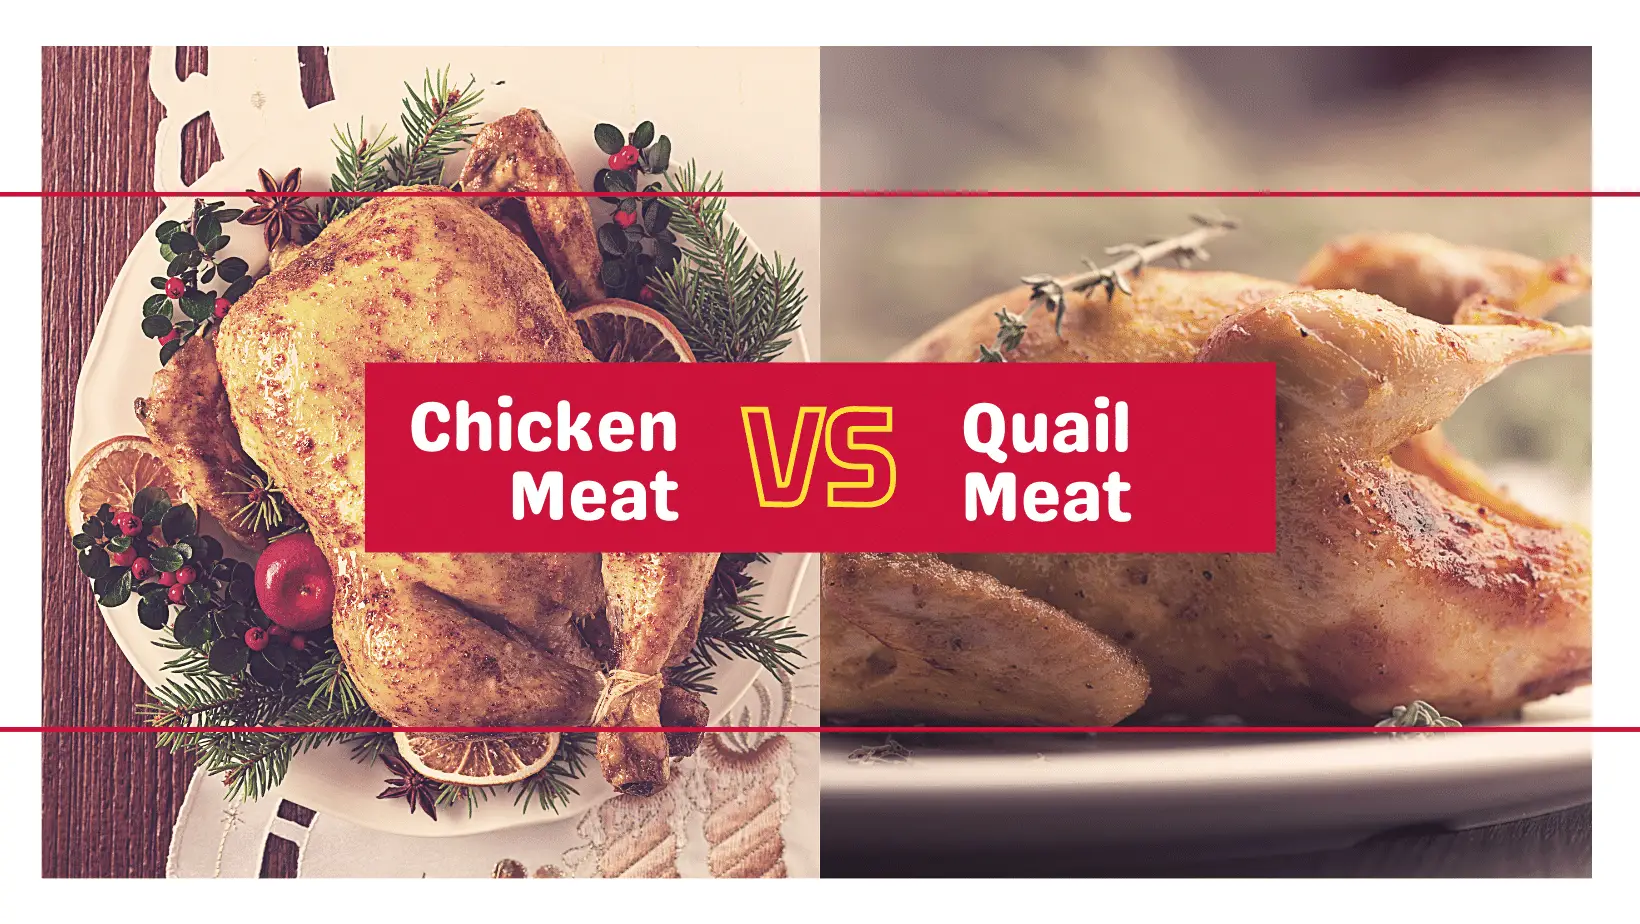 Quail Meat vs. Chicken Meat